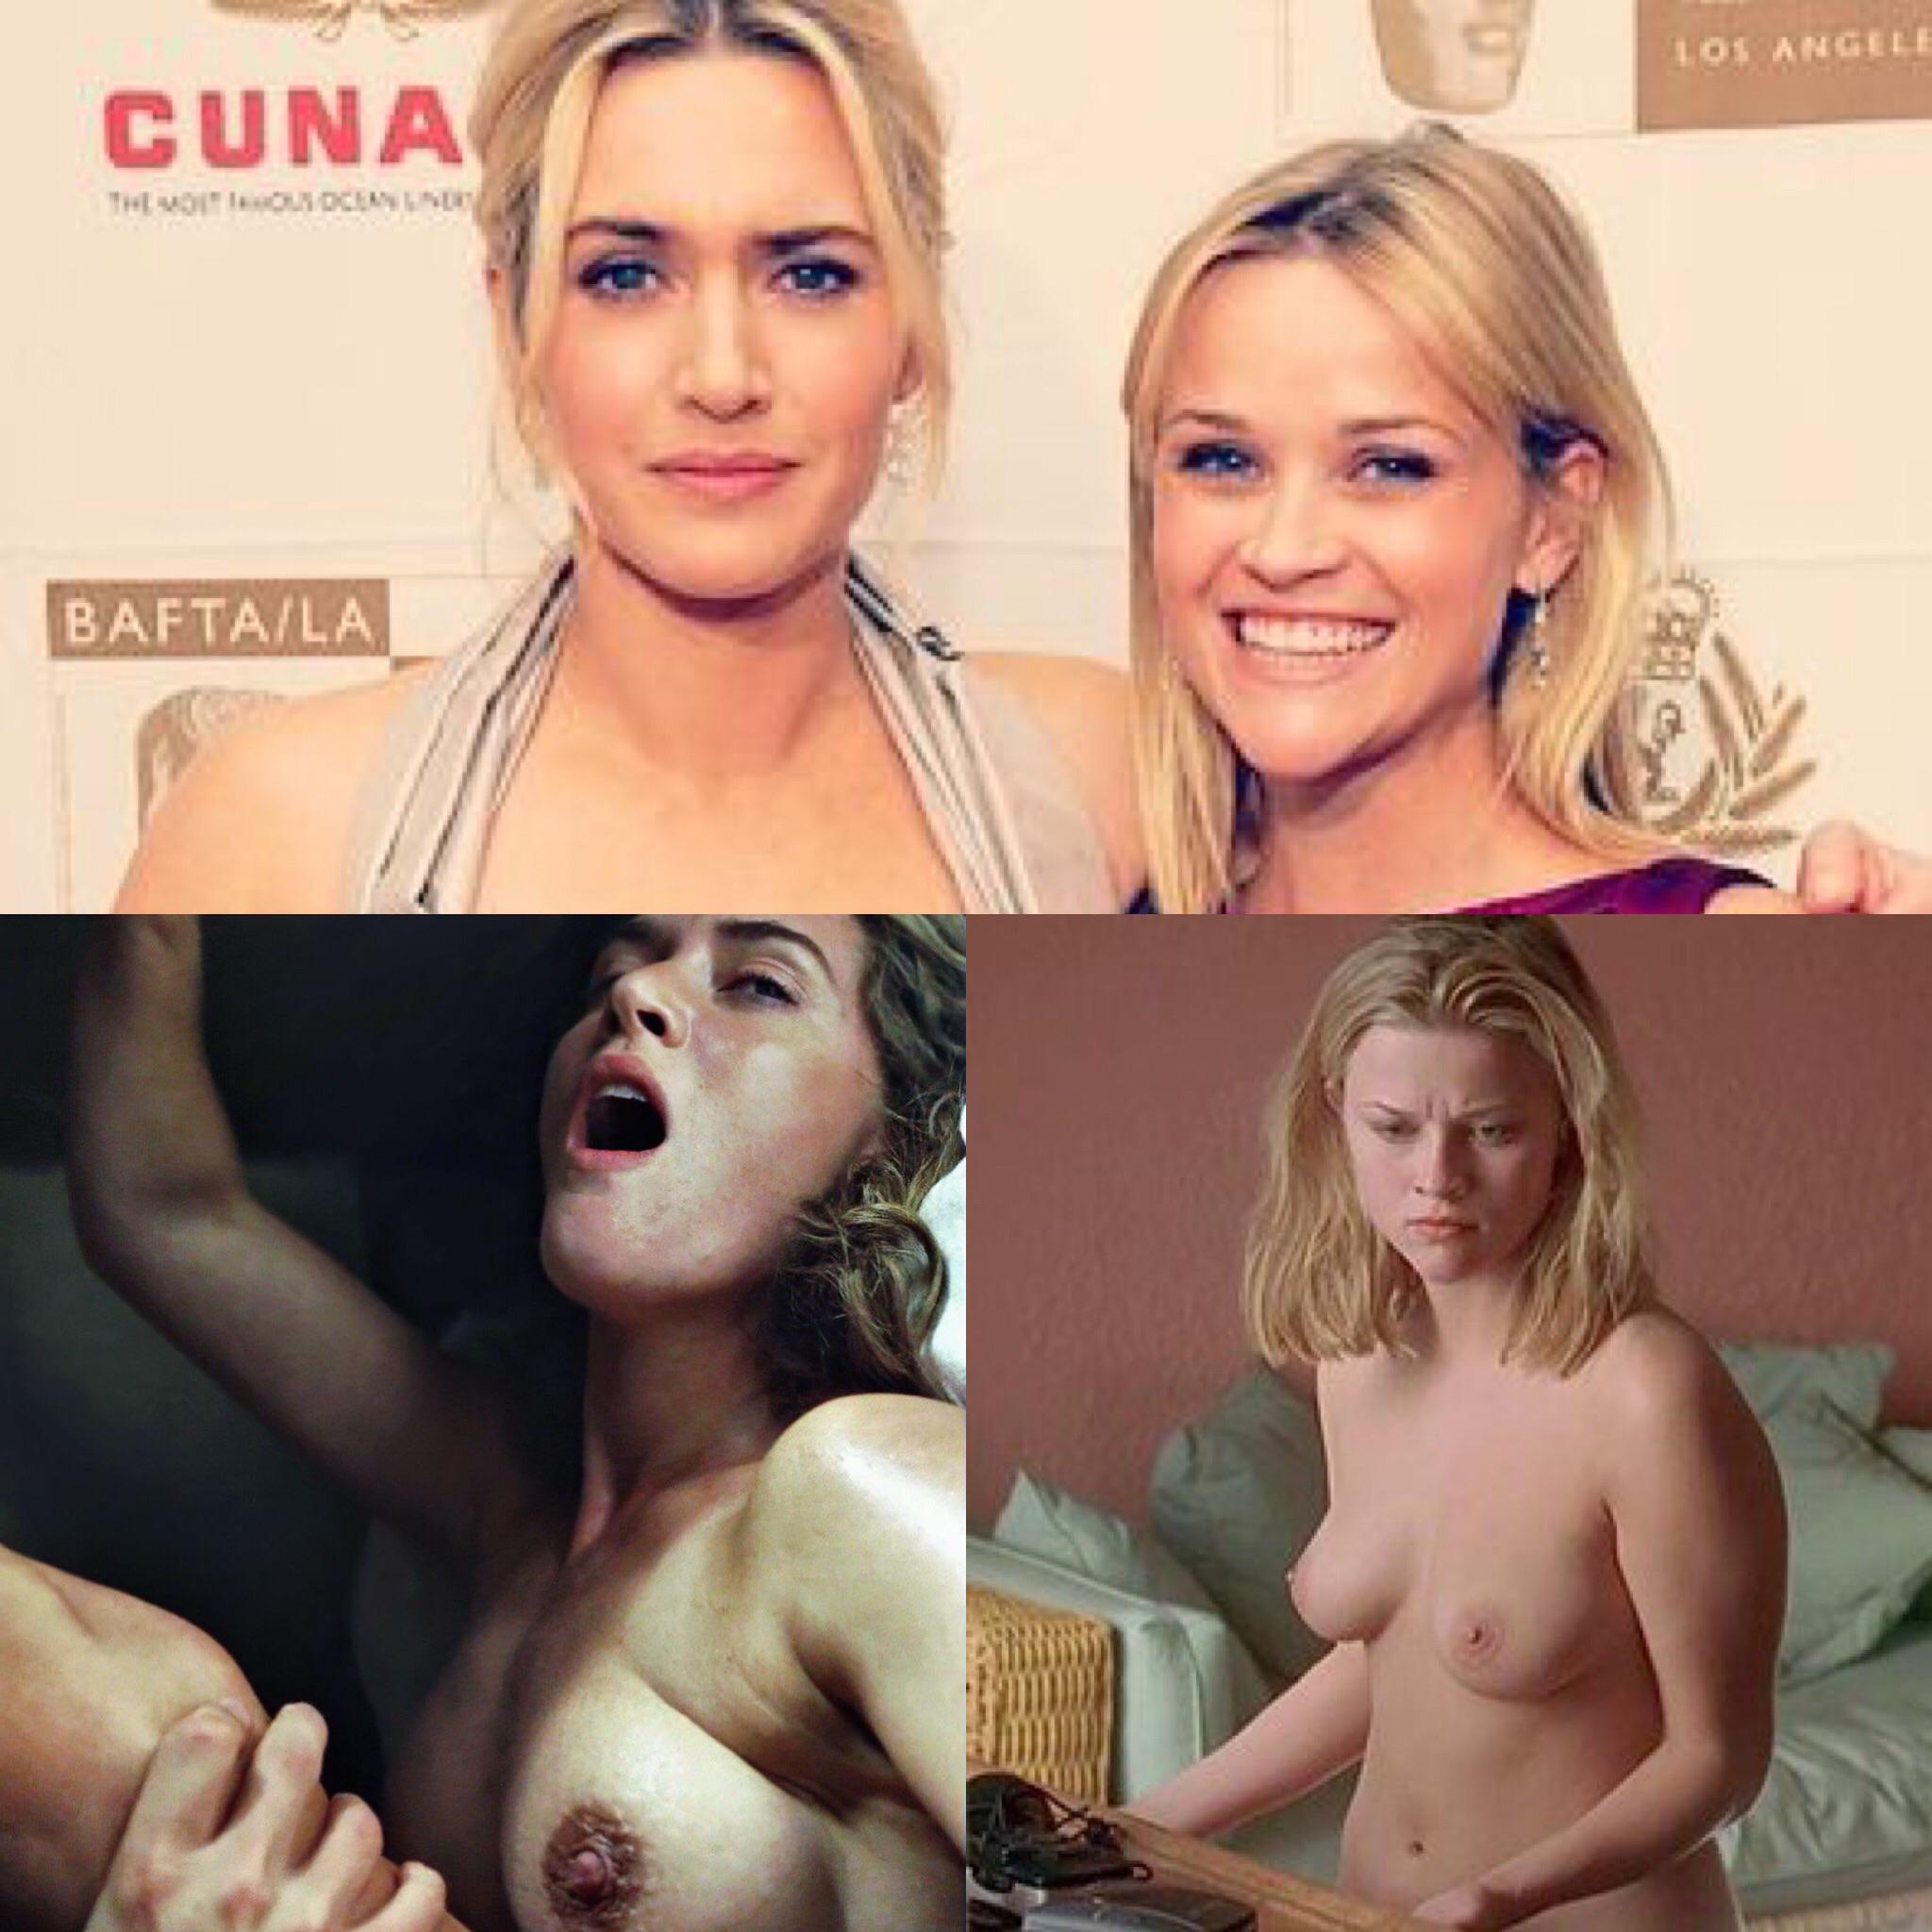 Kate Winslet and Reese Witherspoon are two ultimate MILF goddesses